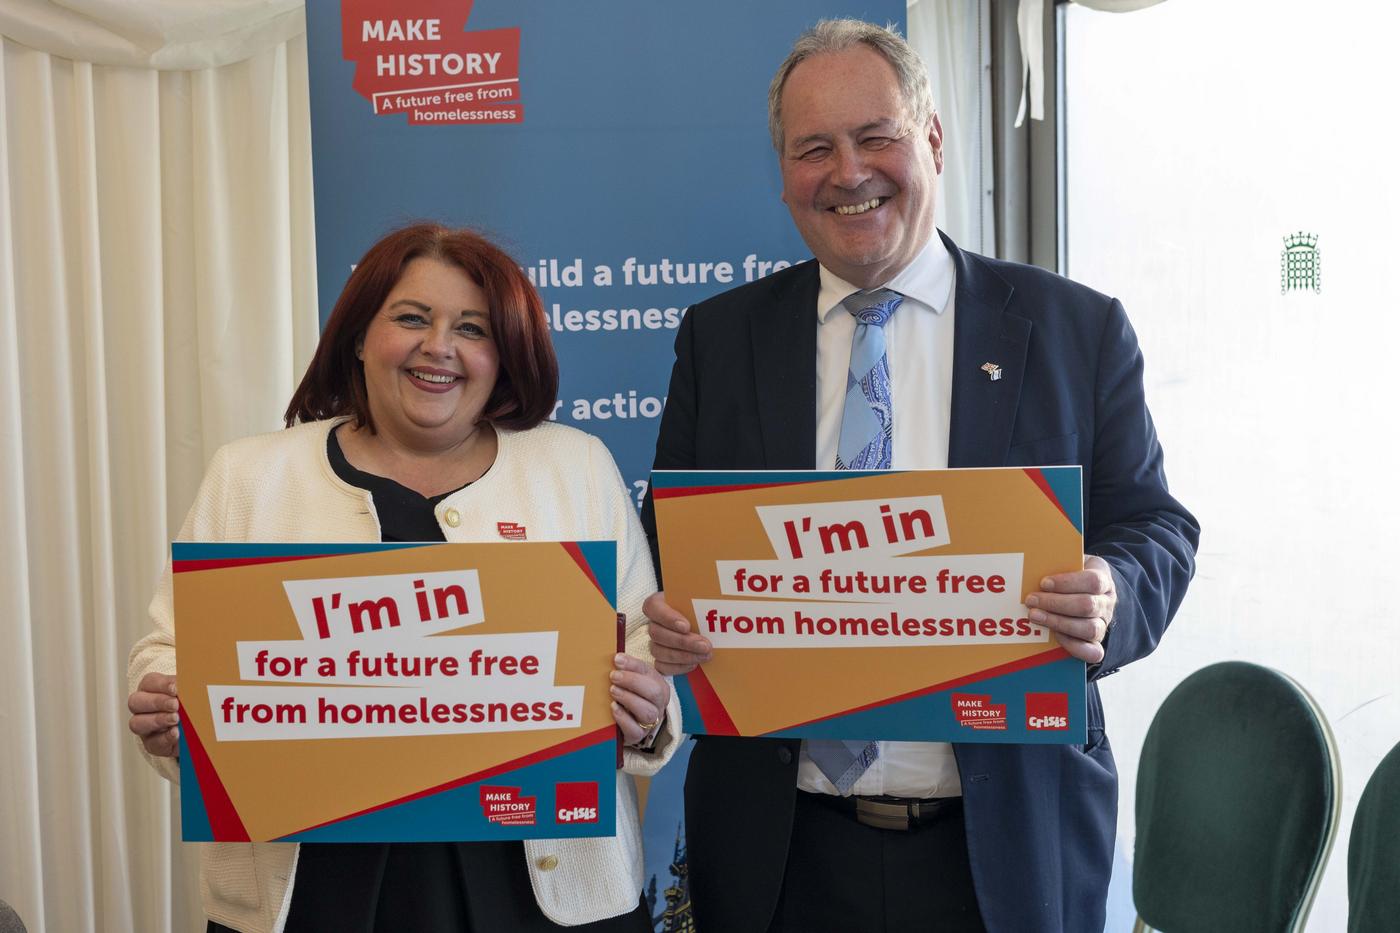 Paula Barker MP and Bob Blackman MP holdings signs that say 'I'm in for a future free from homelessness'